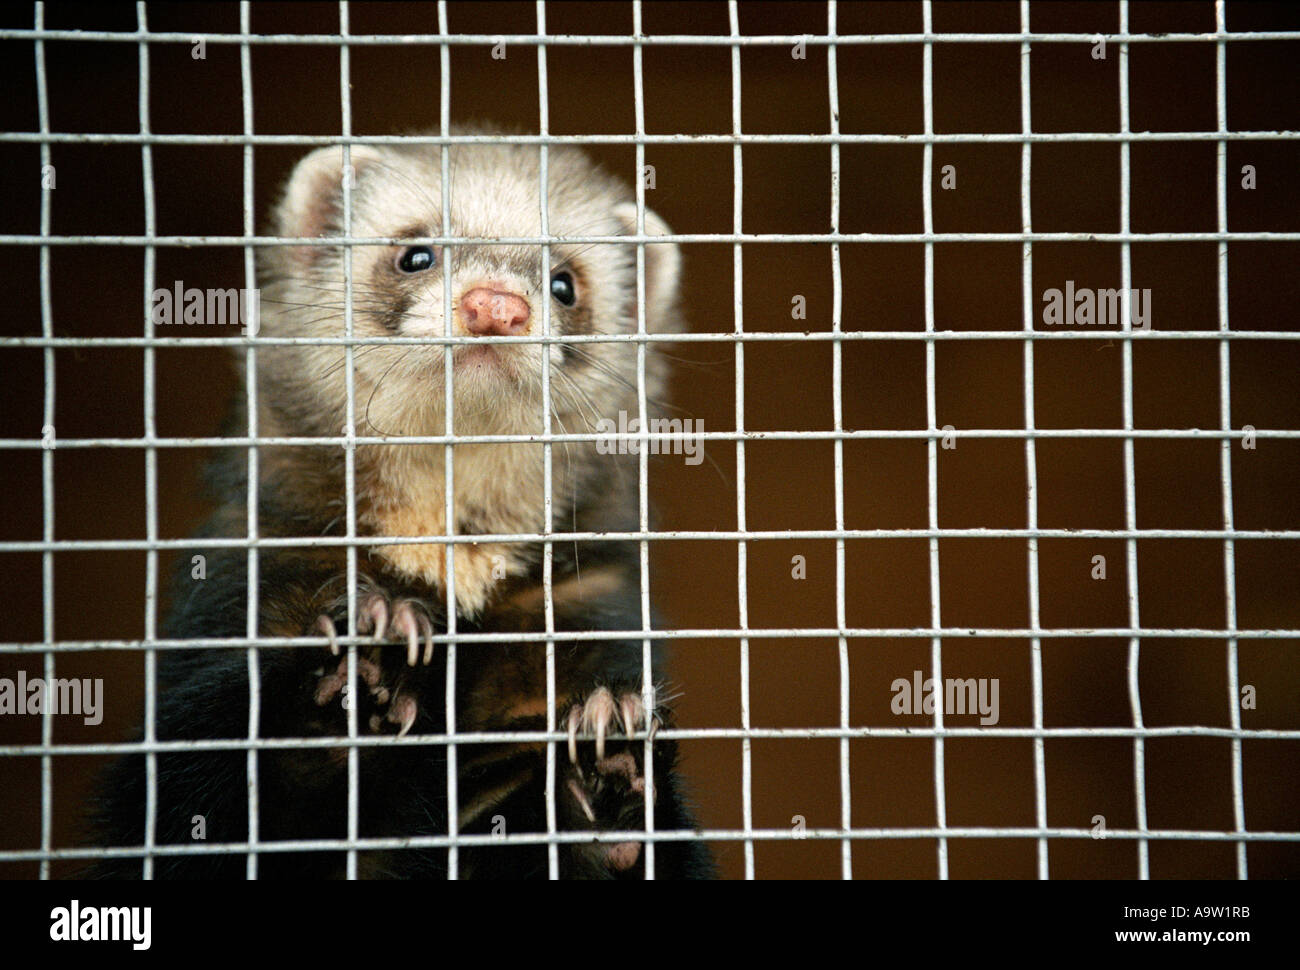 Ferret in a cage Stock Photo